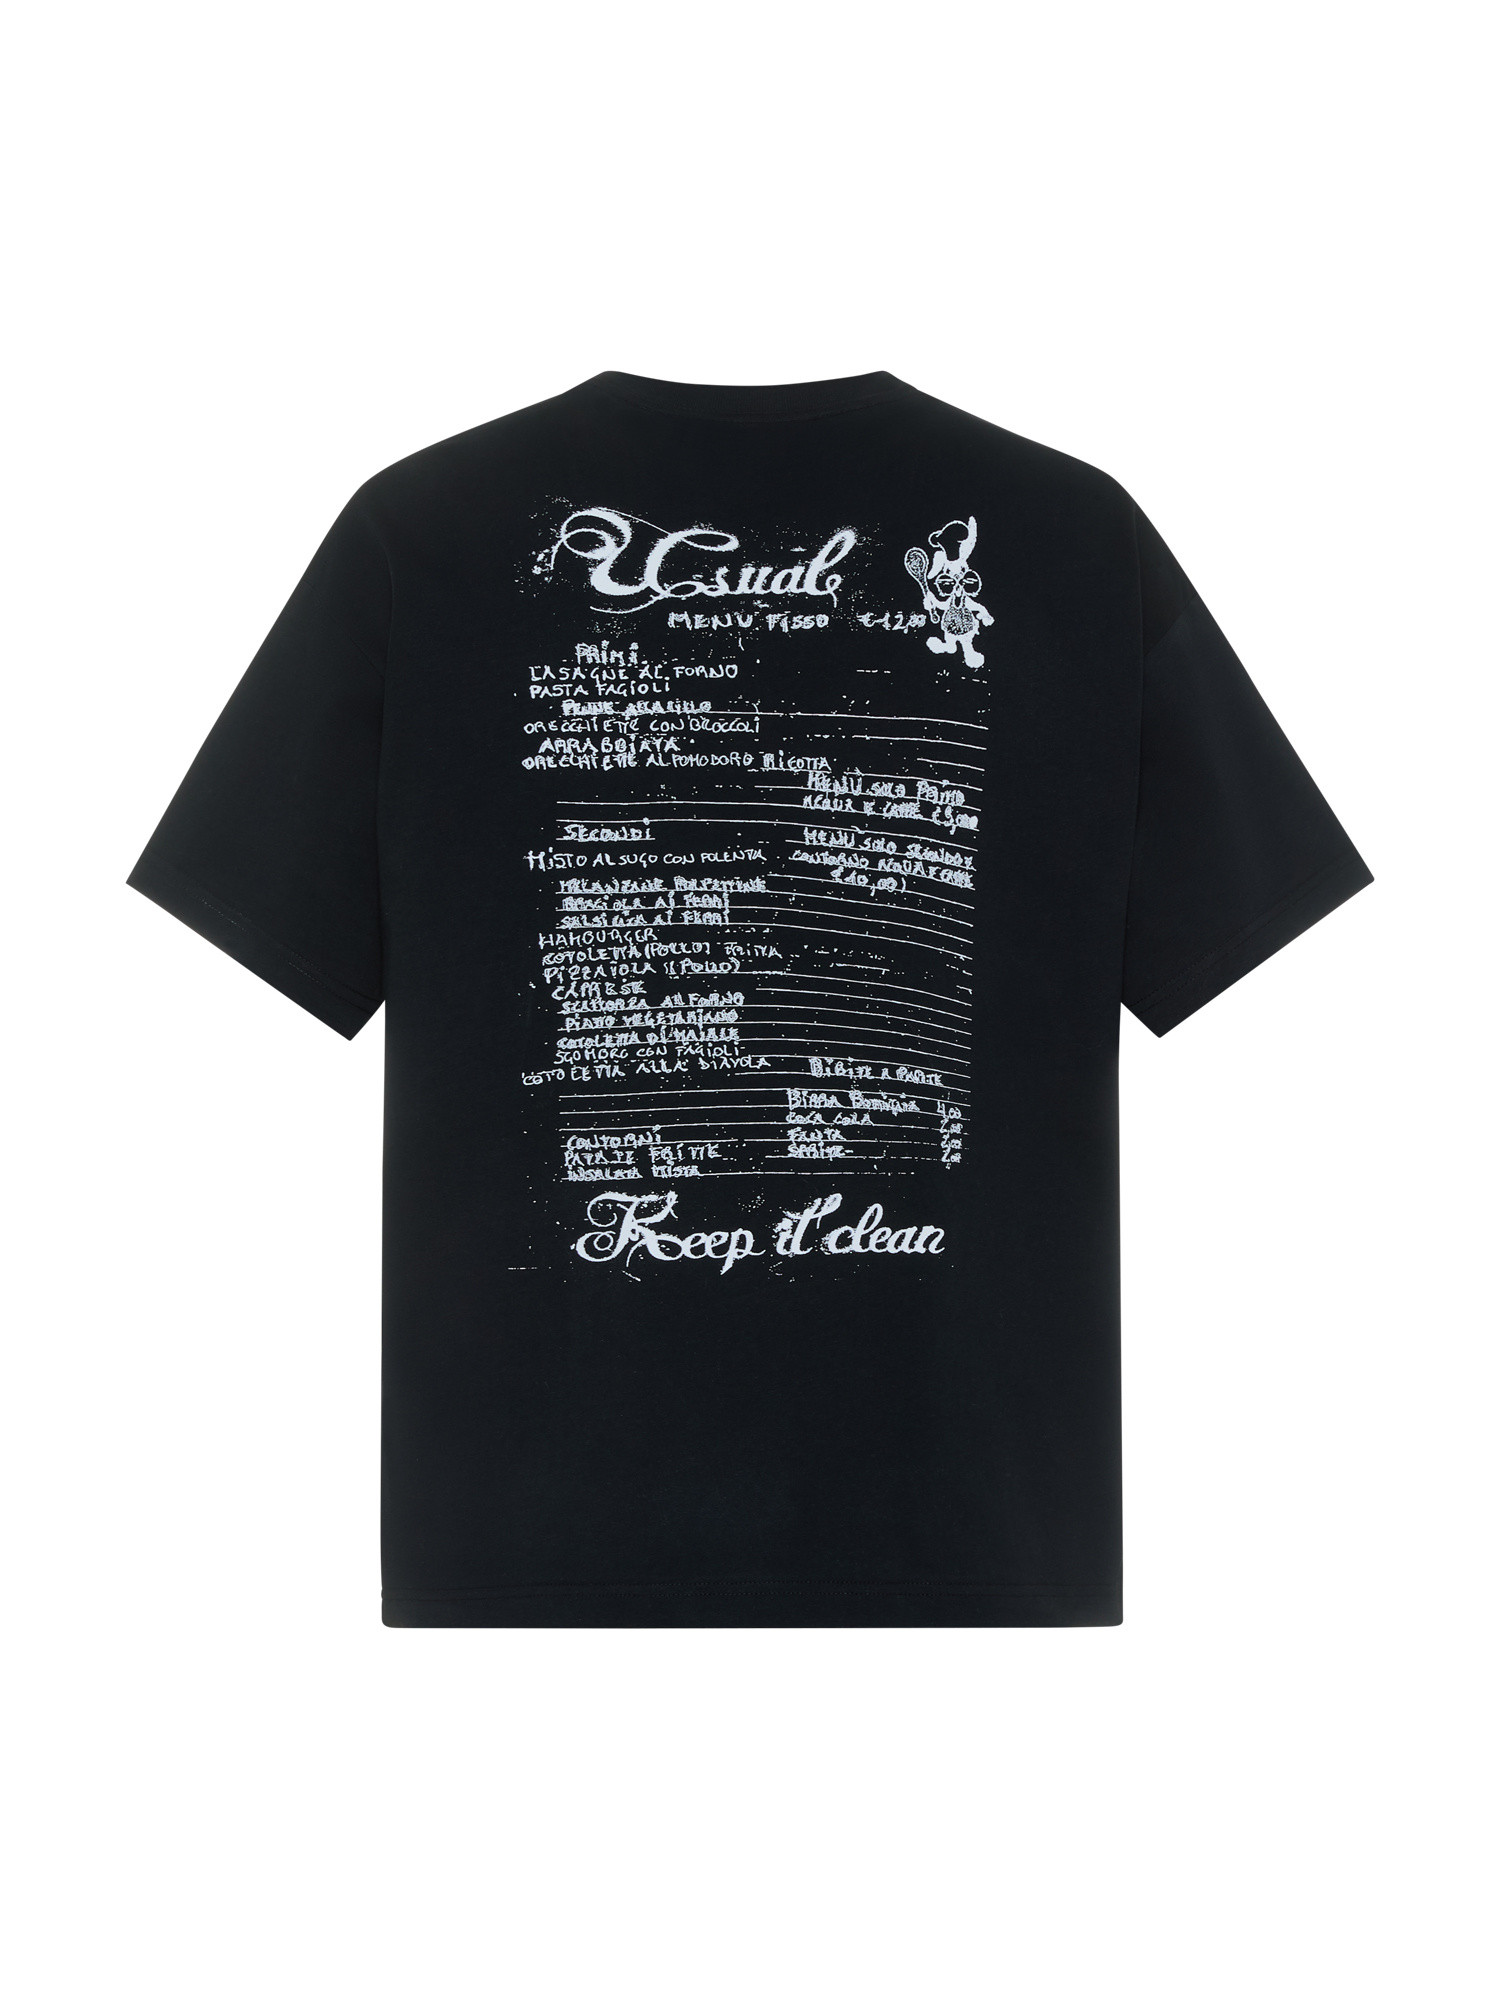 Usual - Trattoria T-Shirt, Black, large image number 1